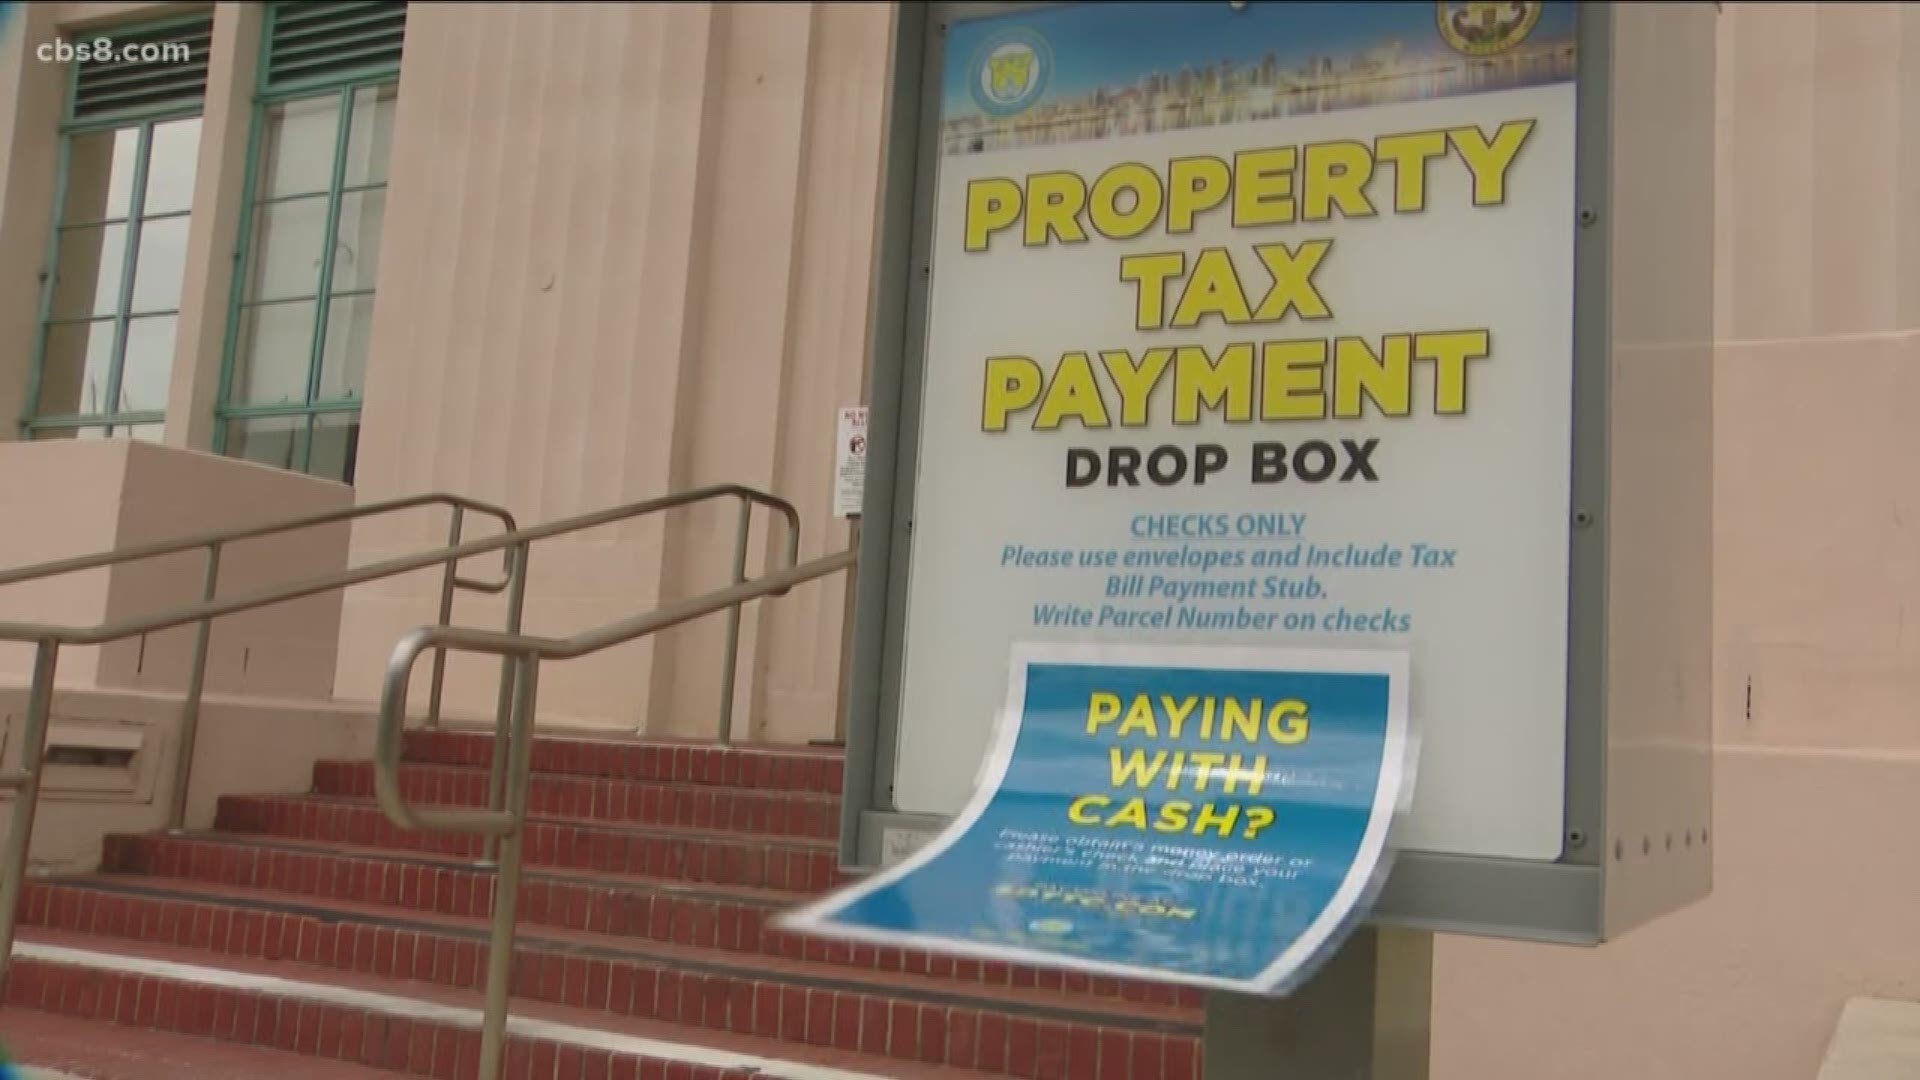 The second installment of property taxes are due on Friday.